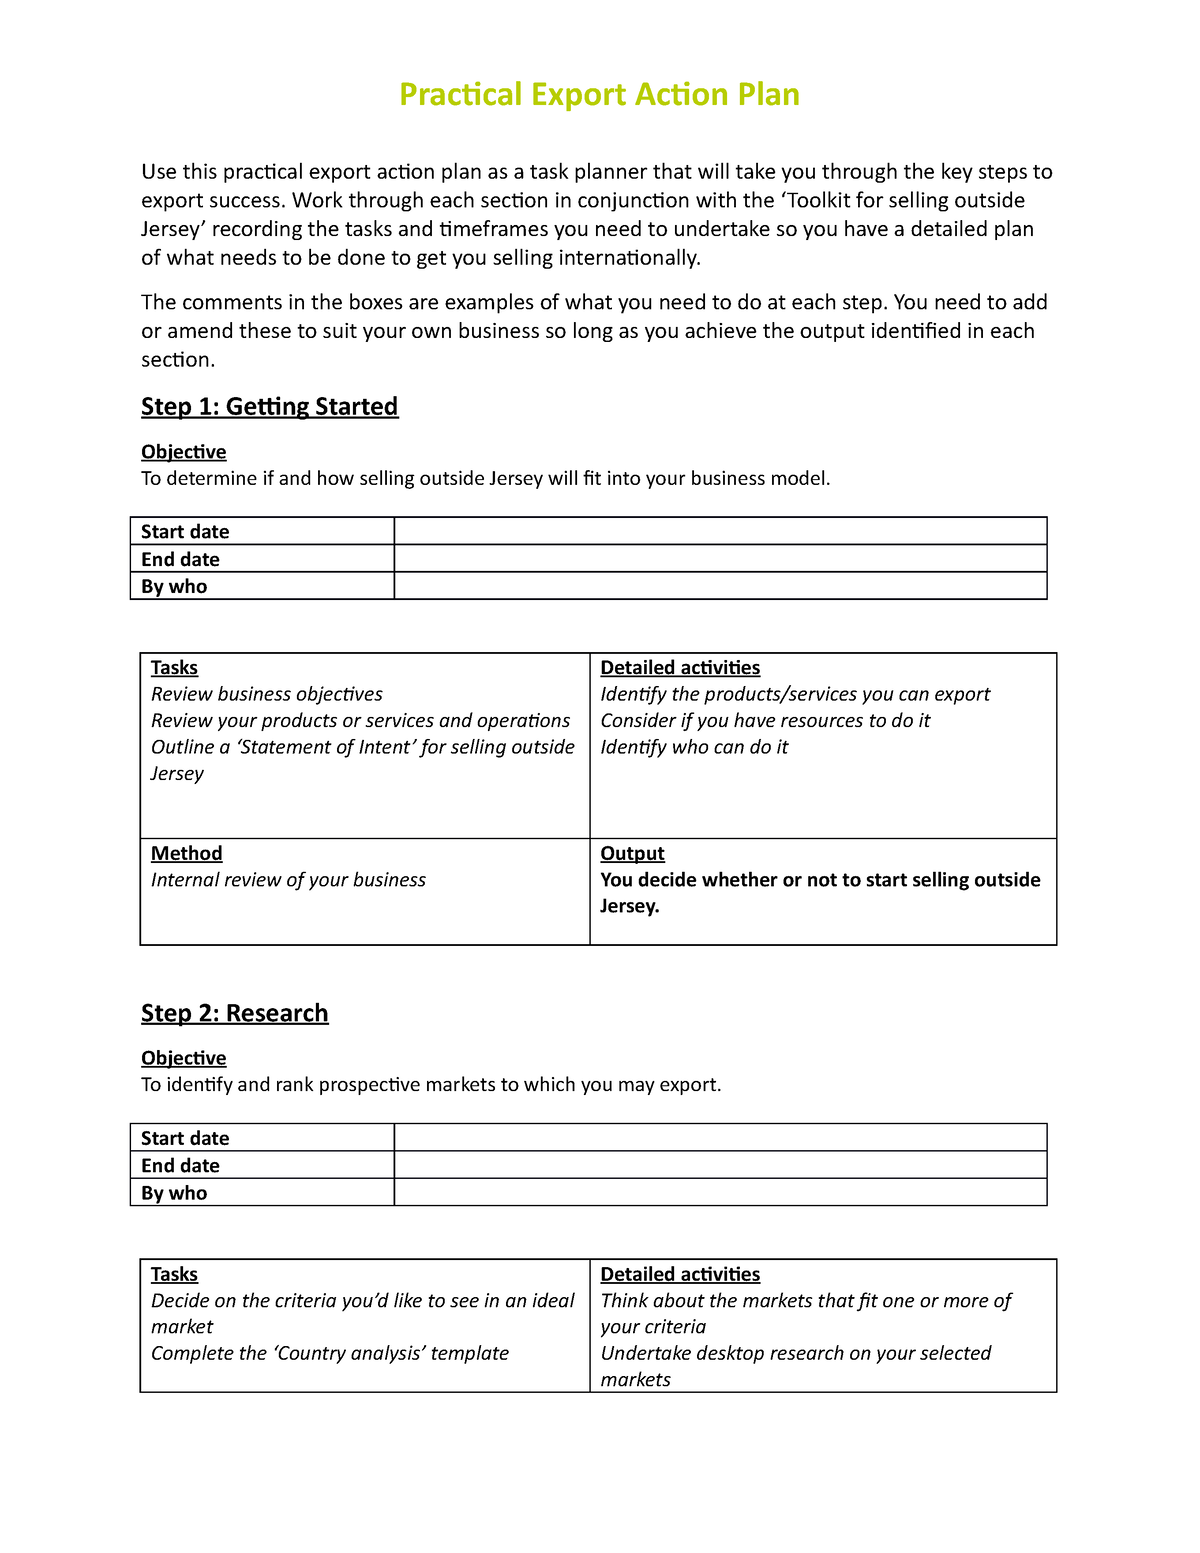 Export Action Plan Template - Use this practical export action plan as ...